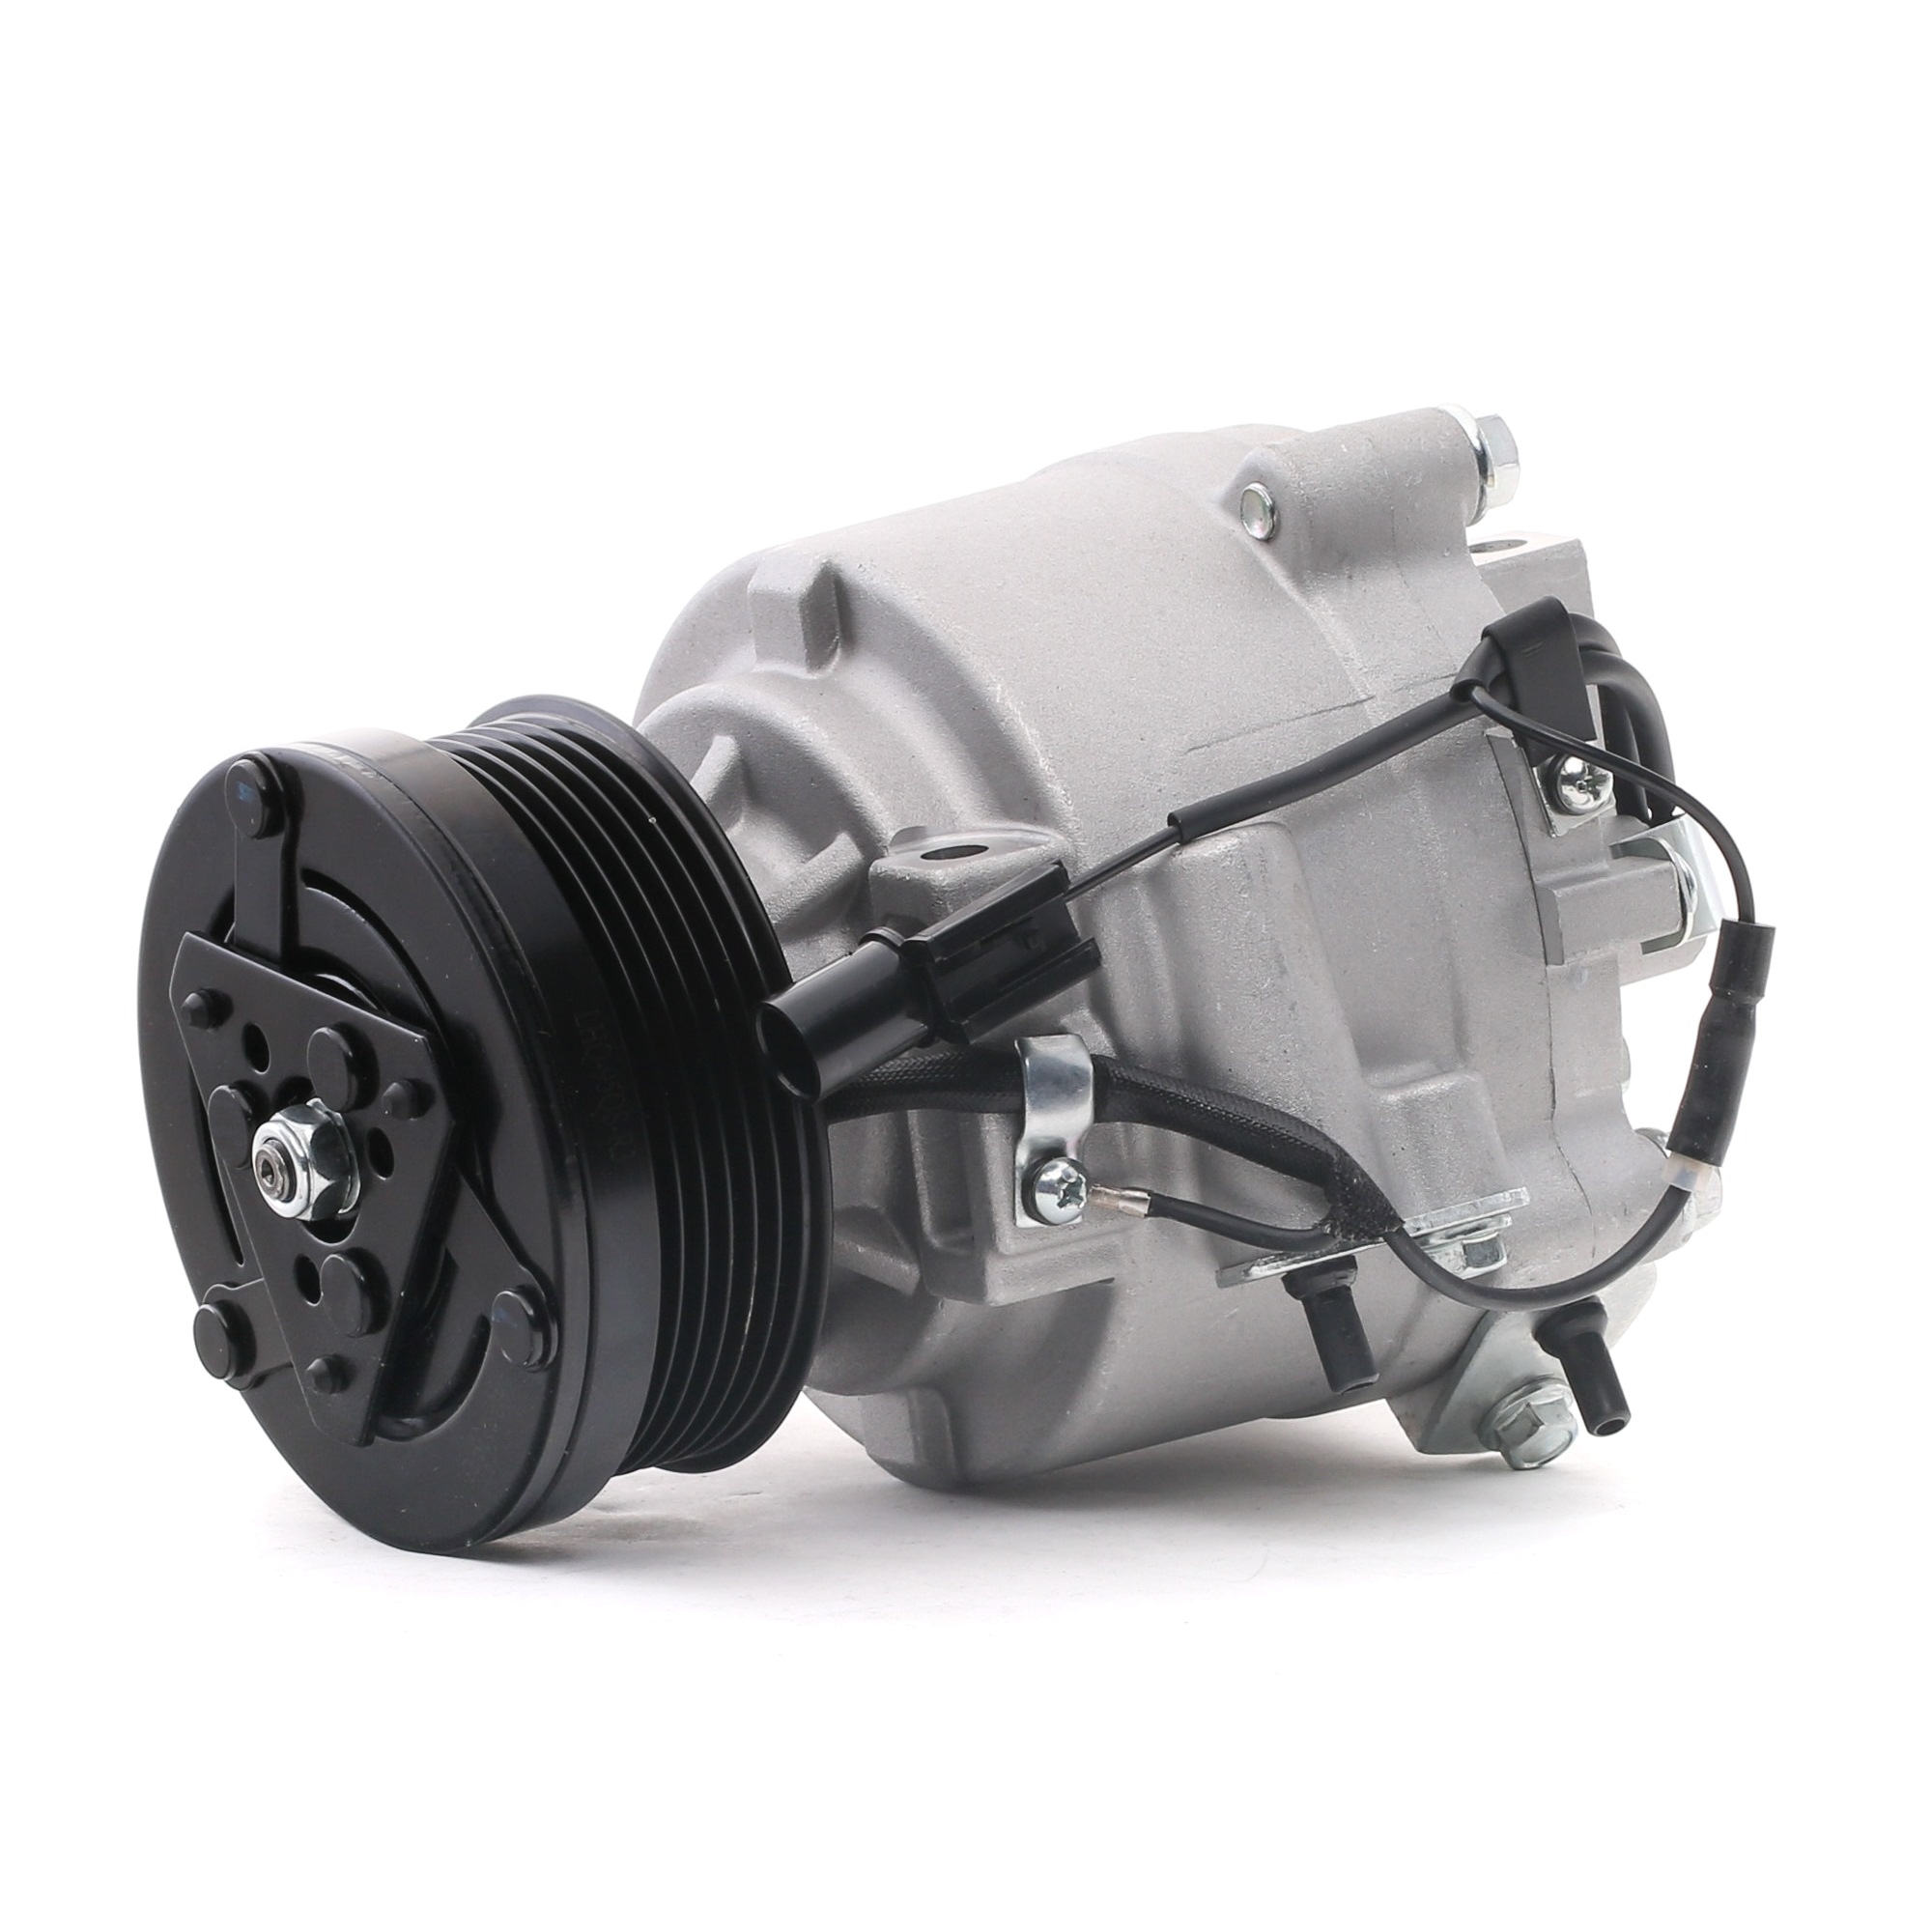 STARK SKKM-0340244 Air conditioning compressor MITSUBISHI experience and price